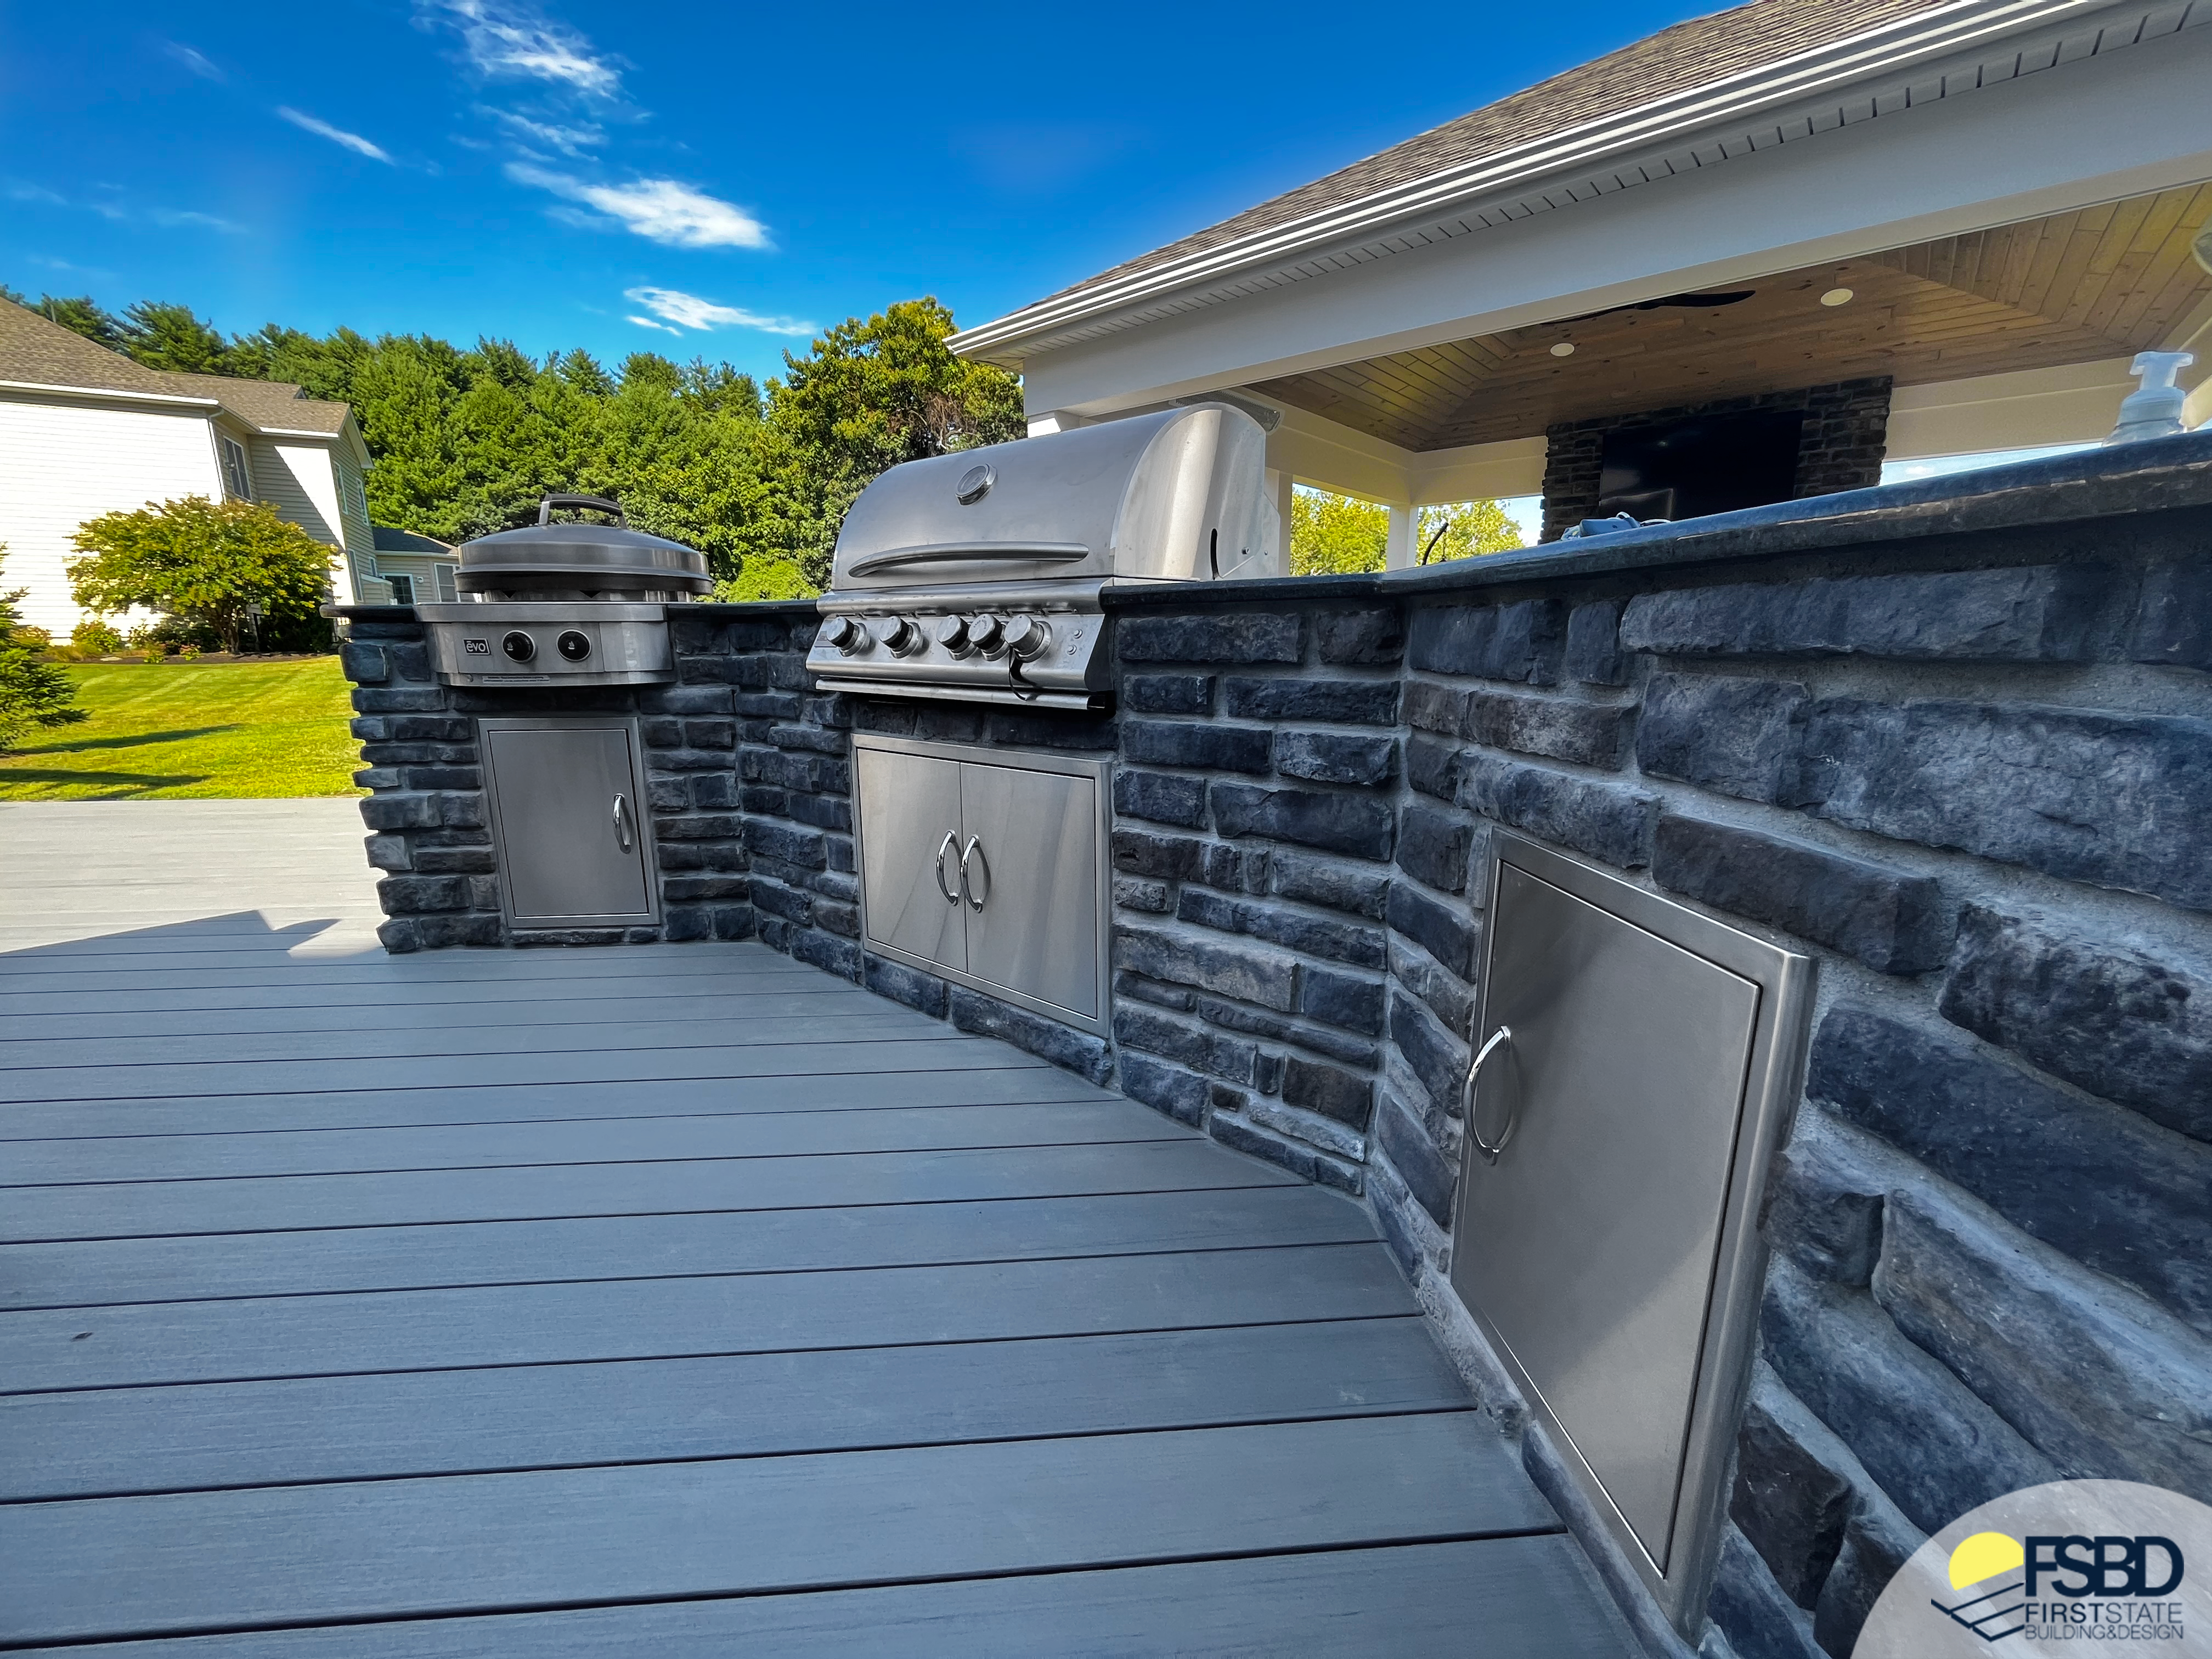 Outdoor kitchen with stone countertops